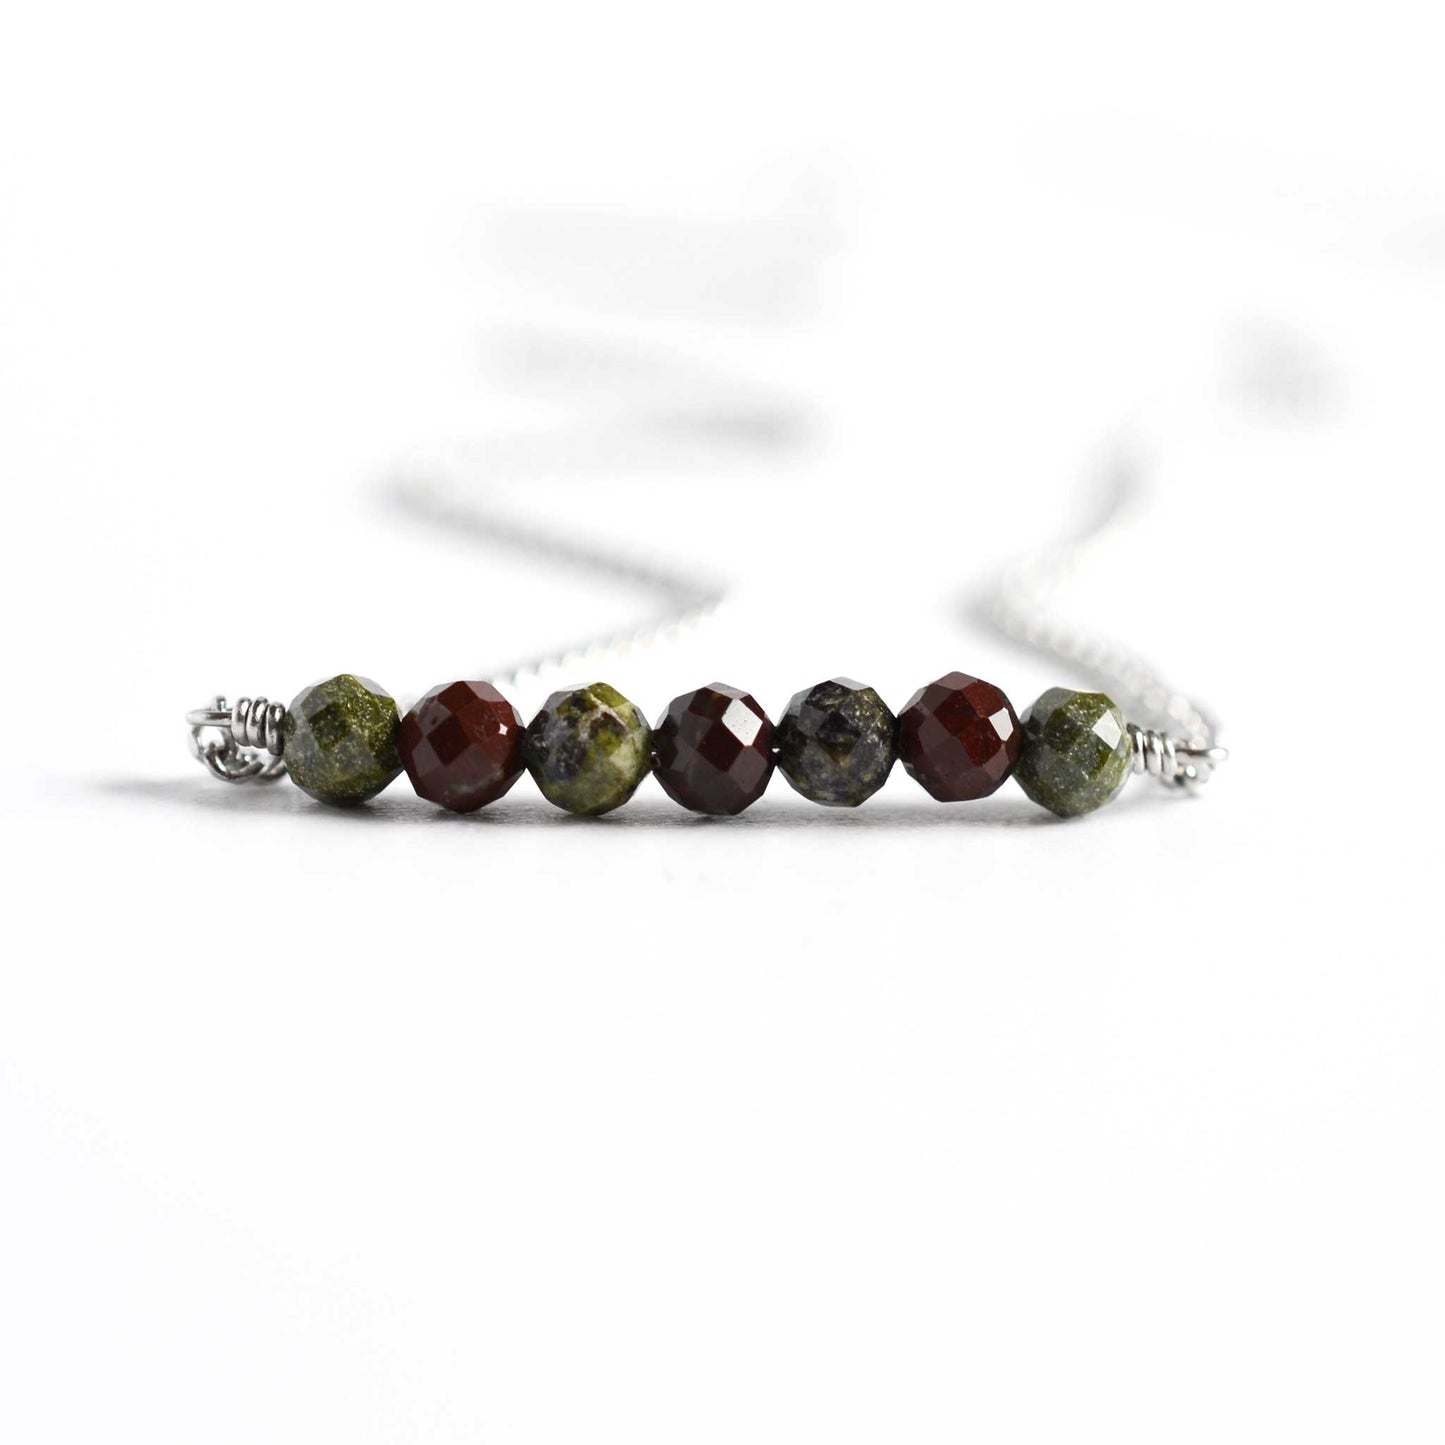 Close up of Bloodstone necklace with seven small round dark green faceted Bloodstone gemstones